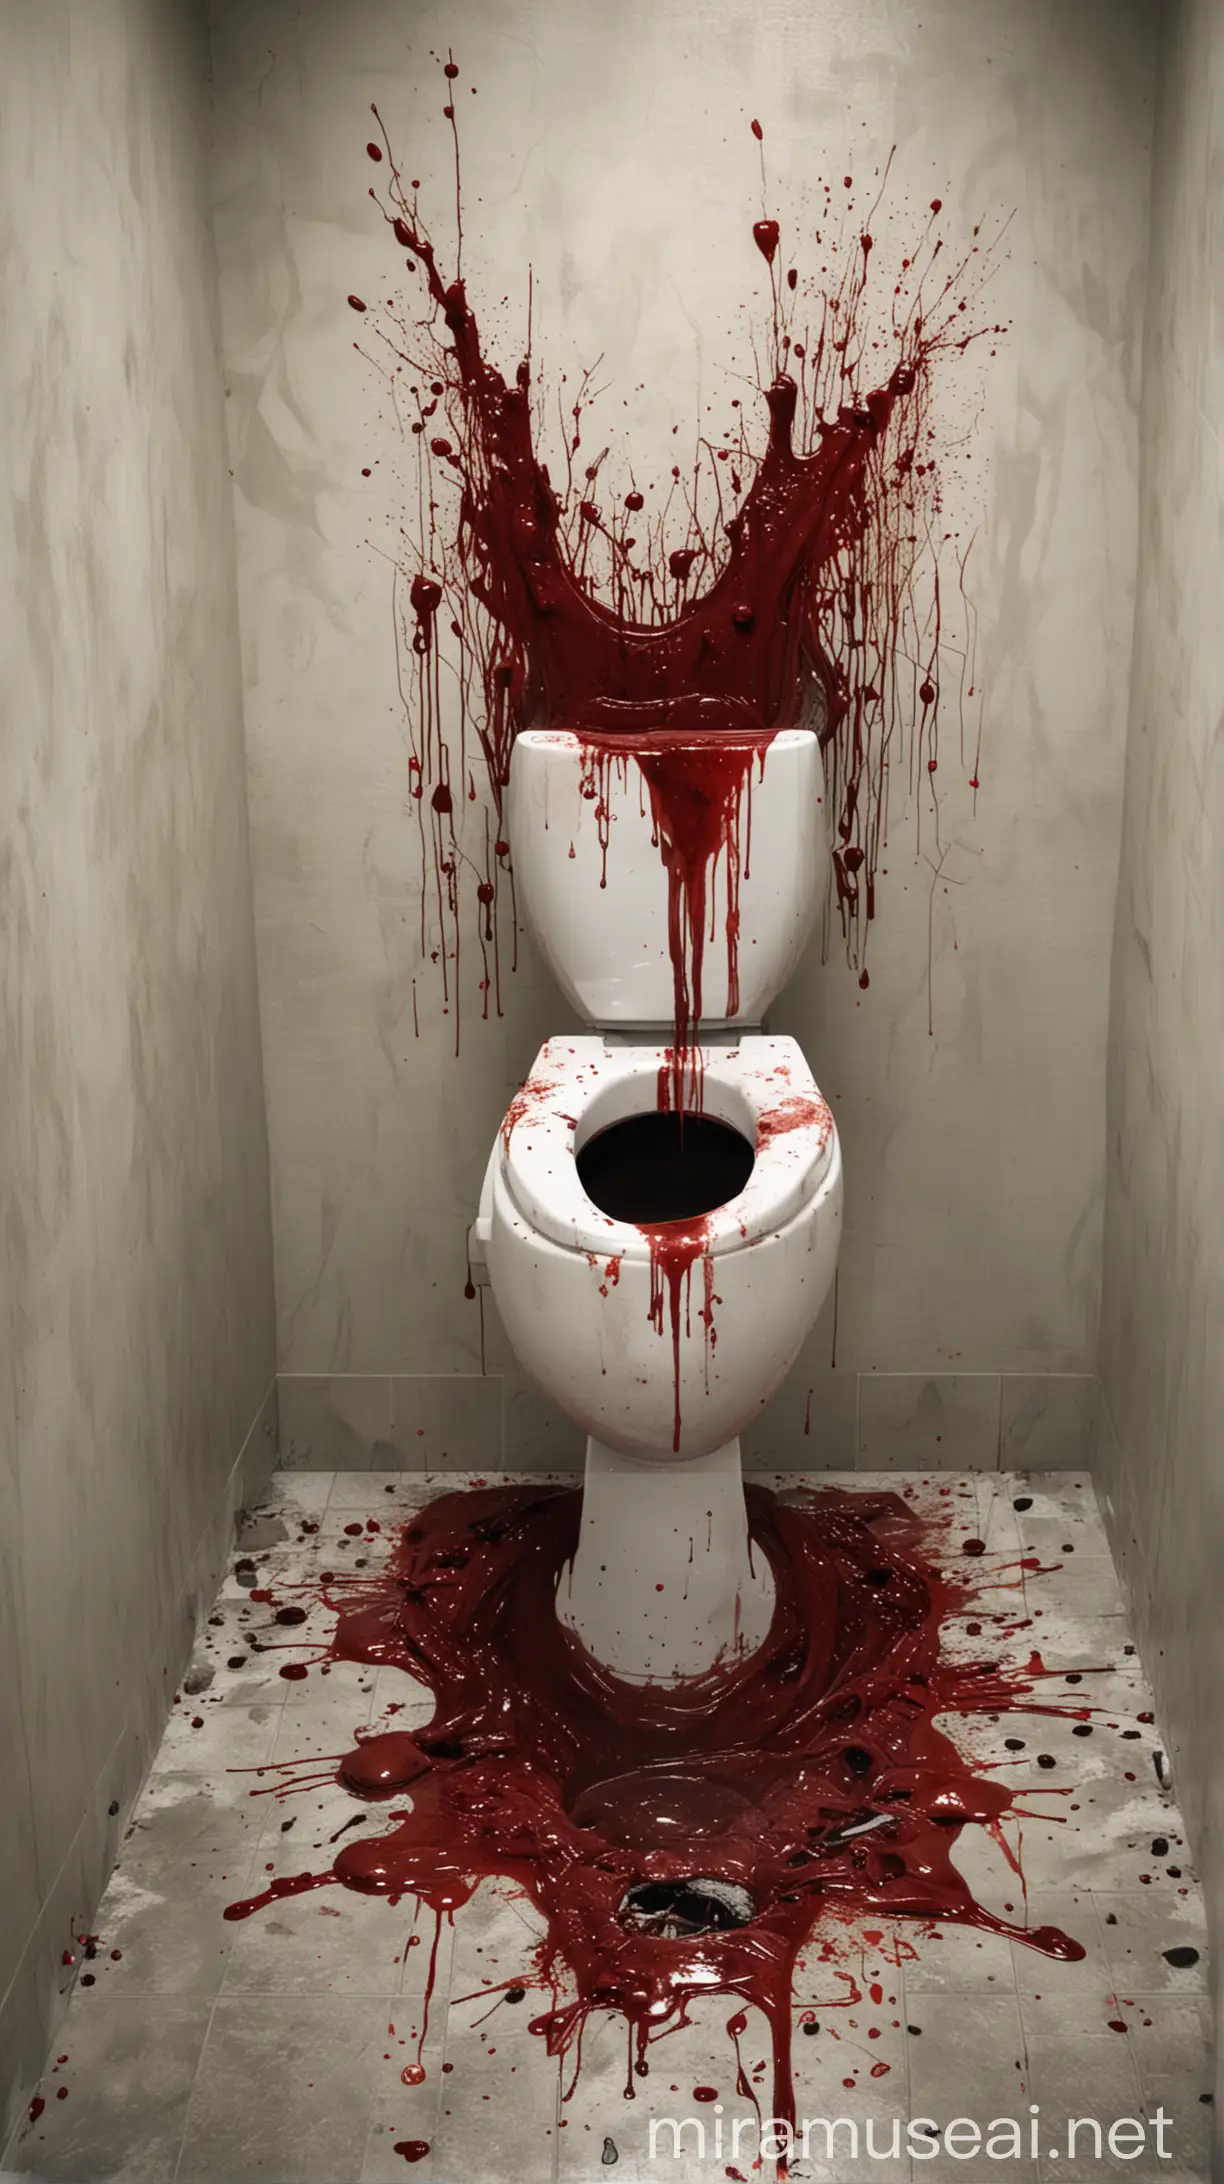 Create a picture of a creepy, horror, scary, eerie and bloody toilet 